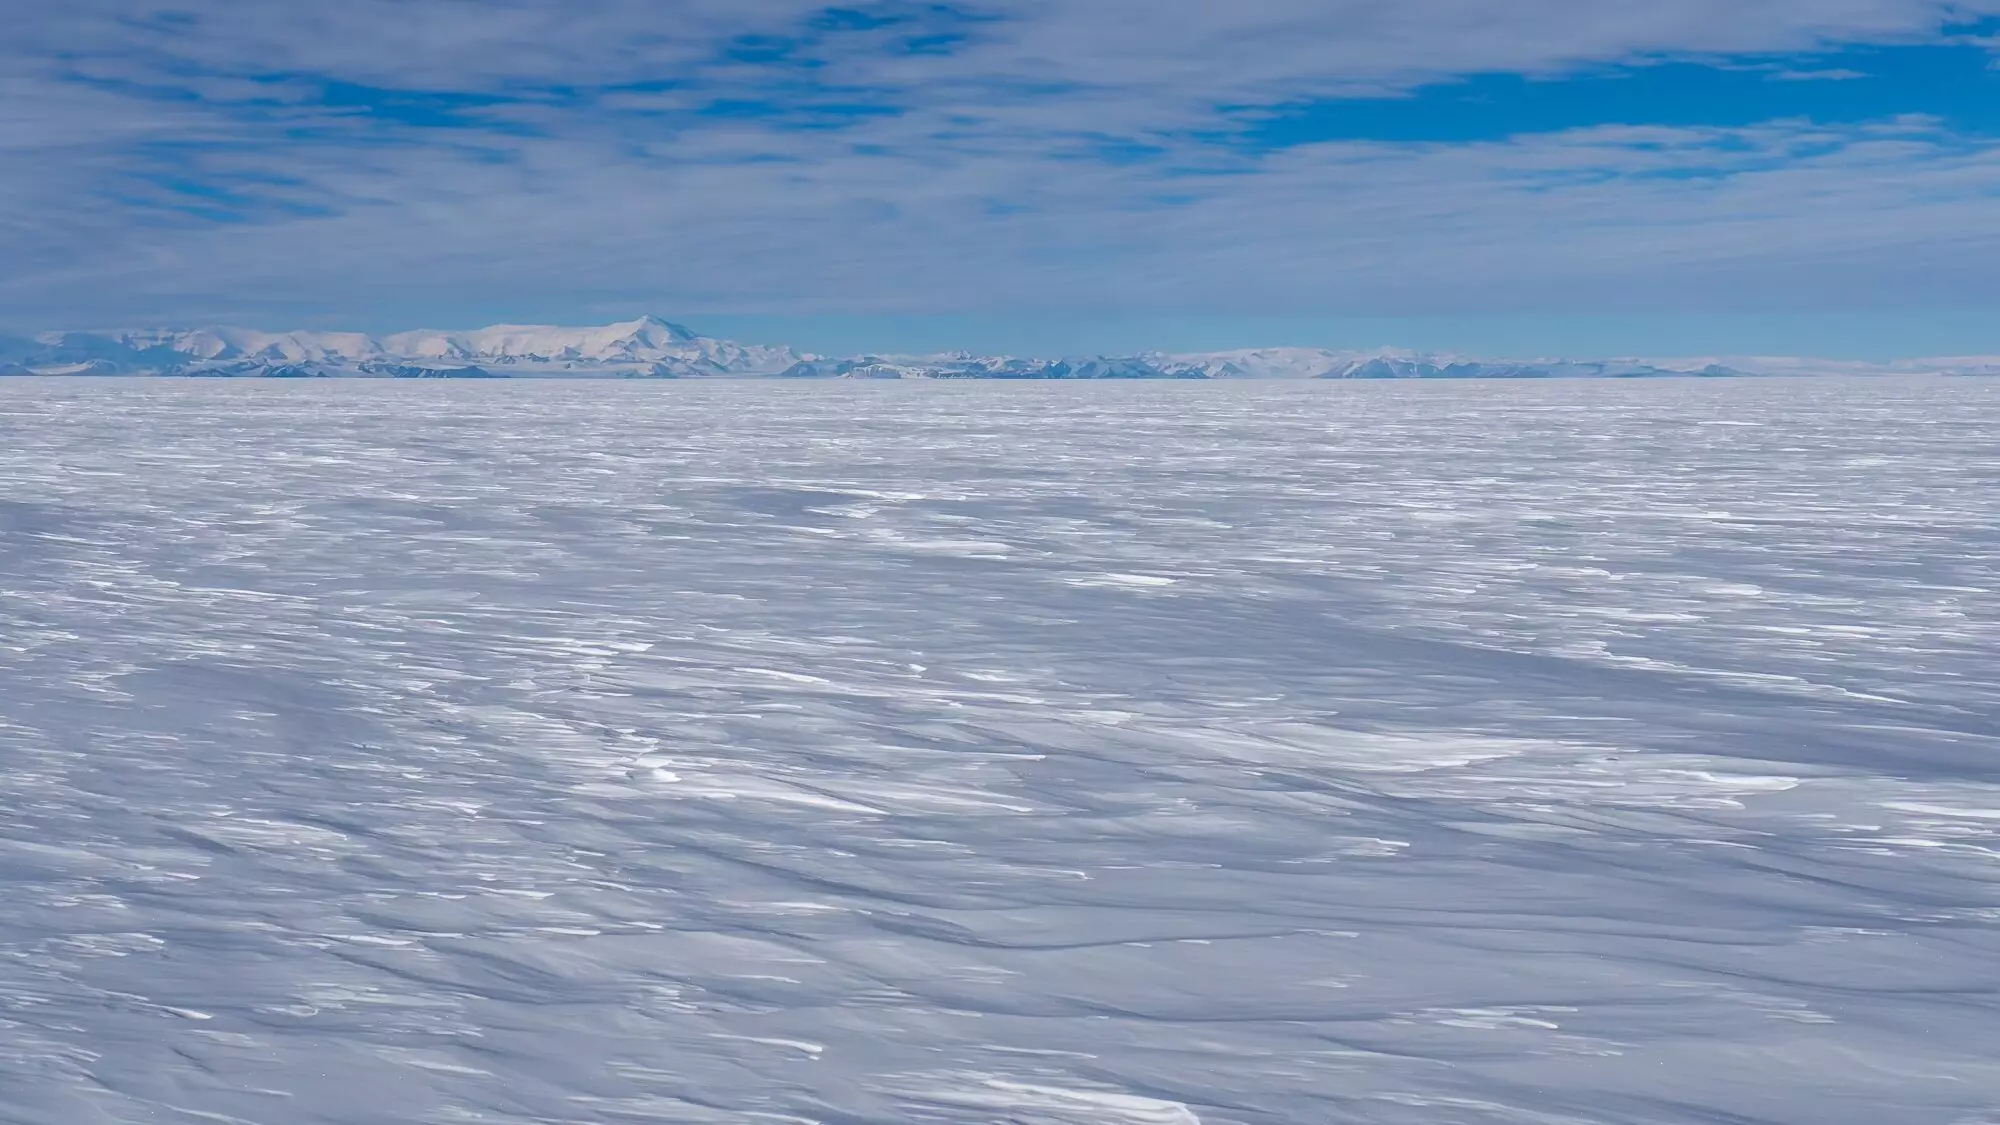 The Future of West Antarctic Ice Sheet Stability